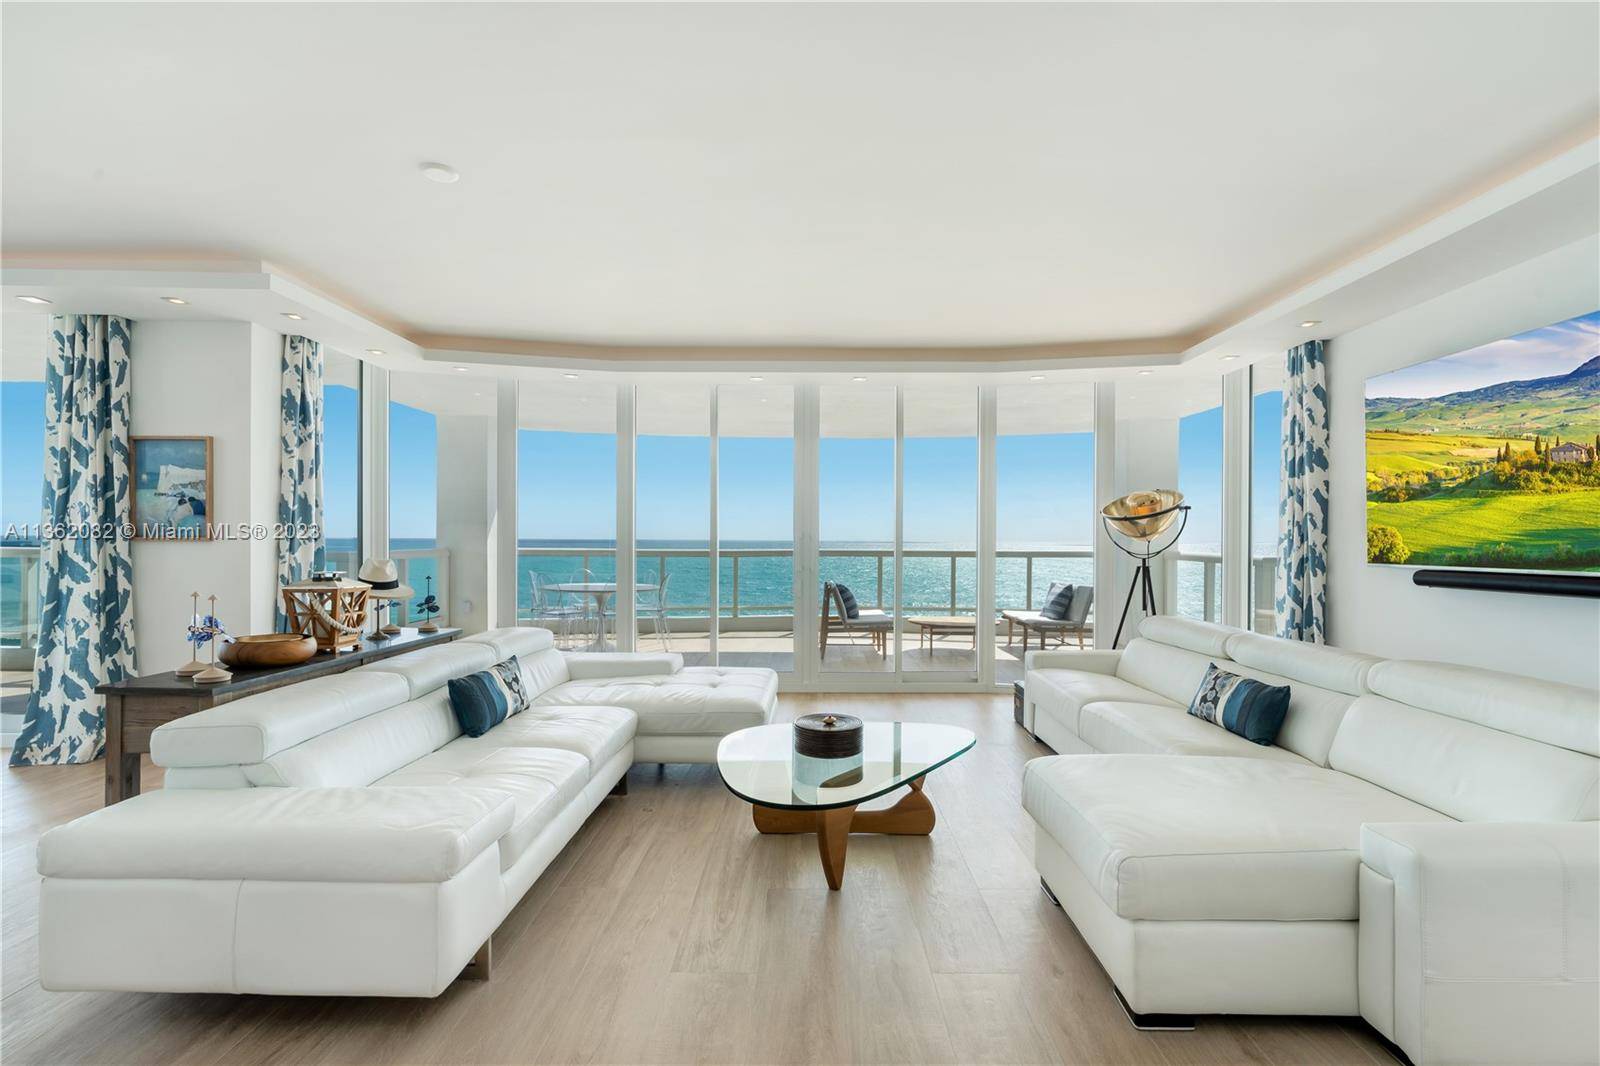 Welcome to this exceptional waterfront condo with direct oceanfront views.